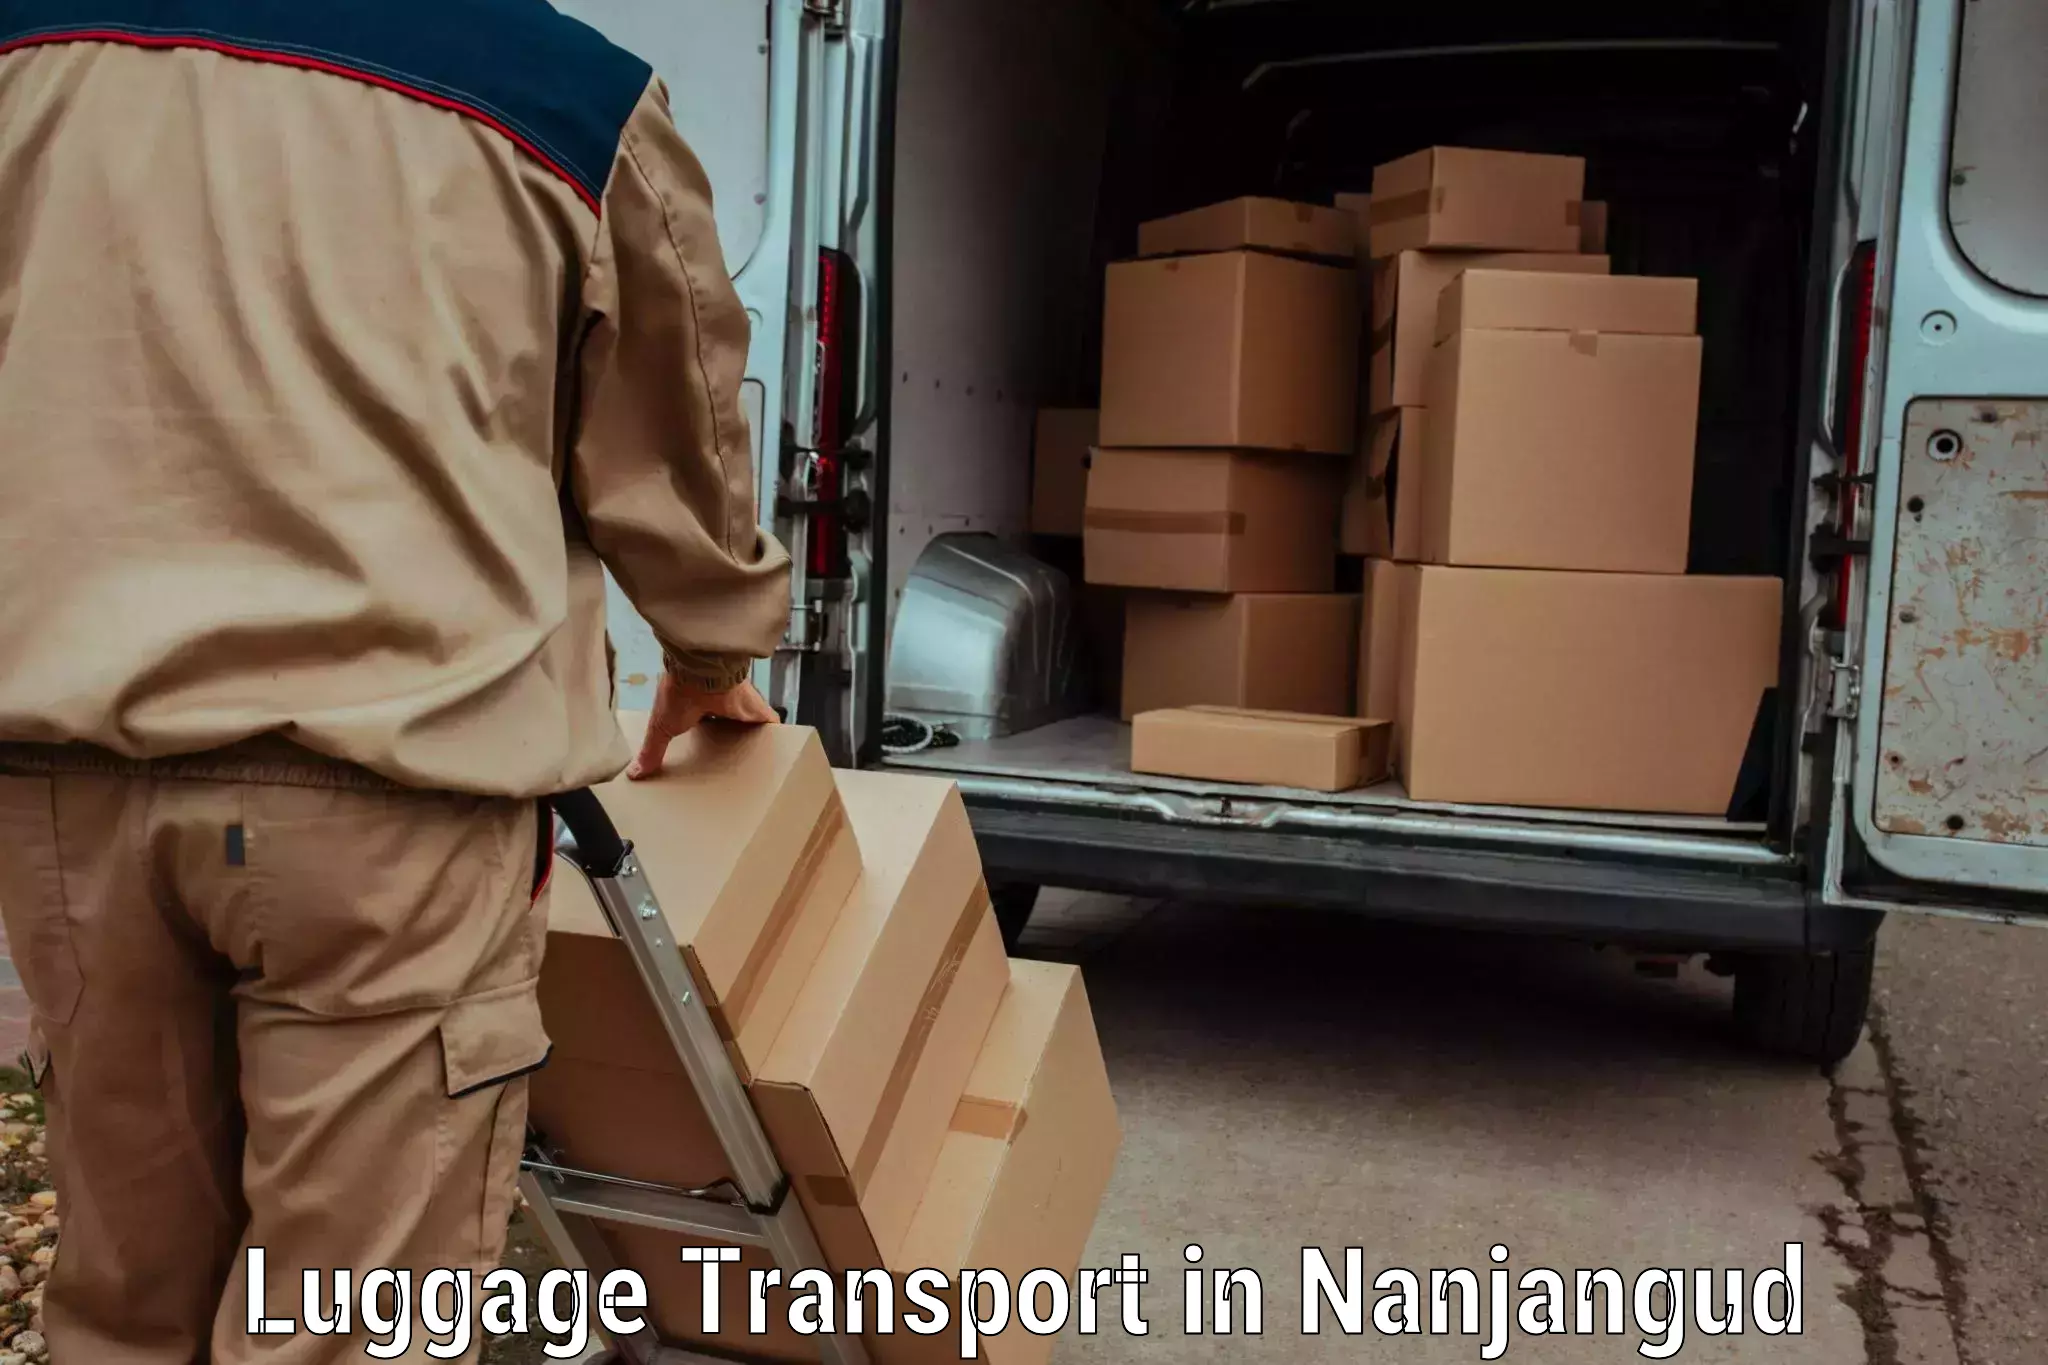 Luggage transport solutions in Nanjangud